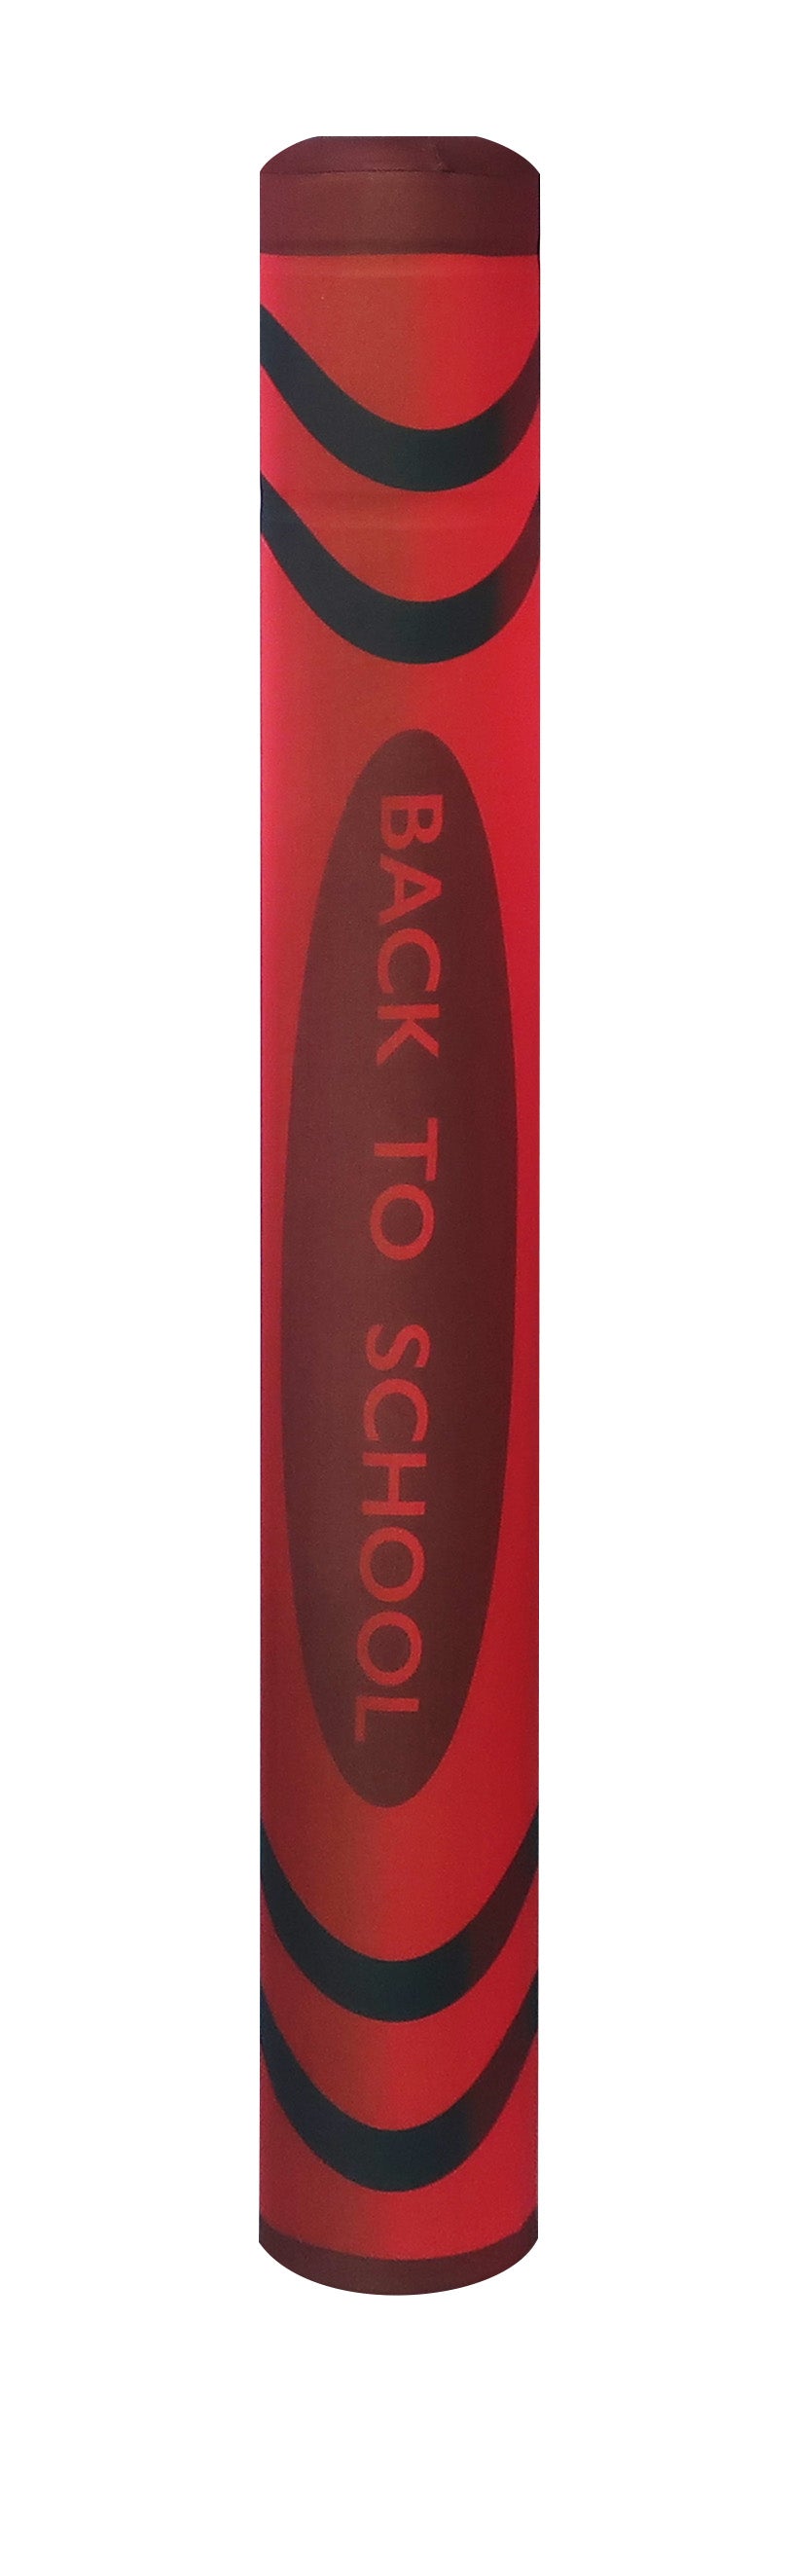 Back To School - Crayon bollard cover - red